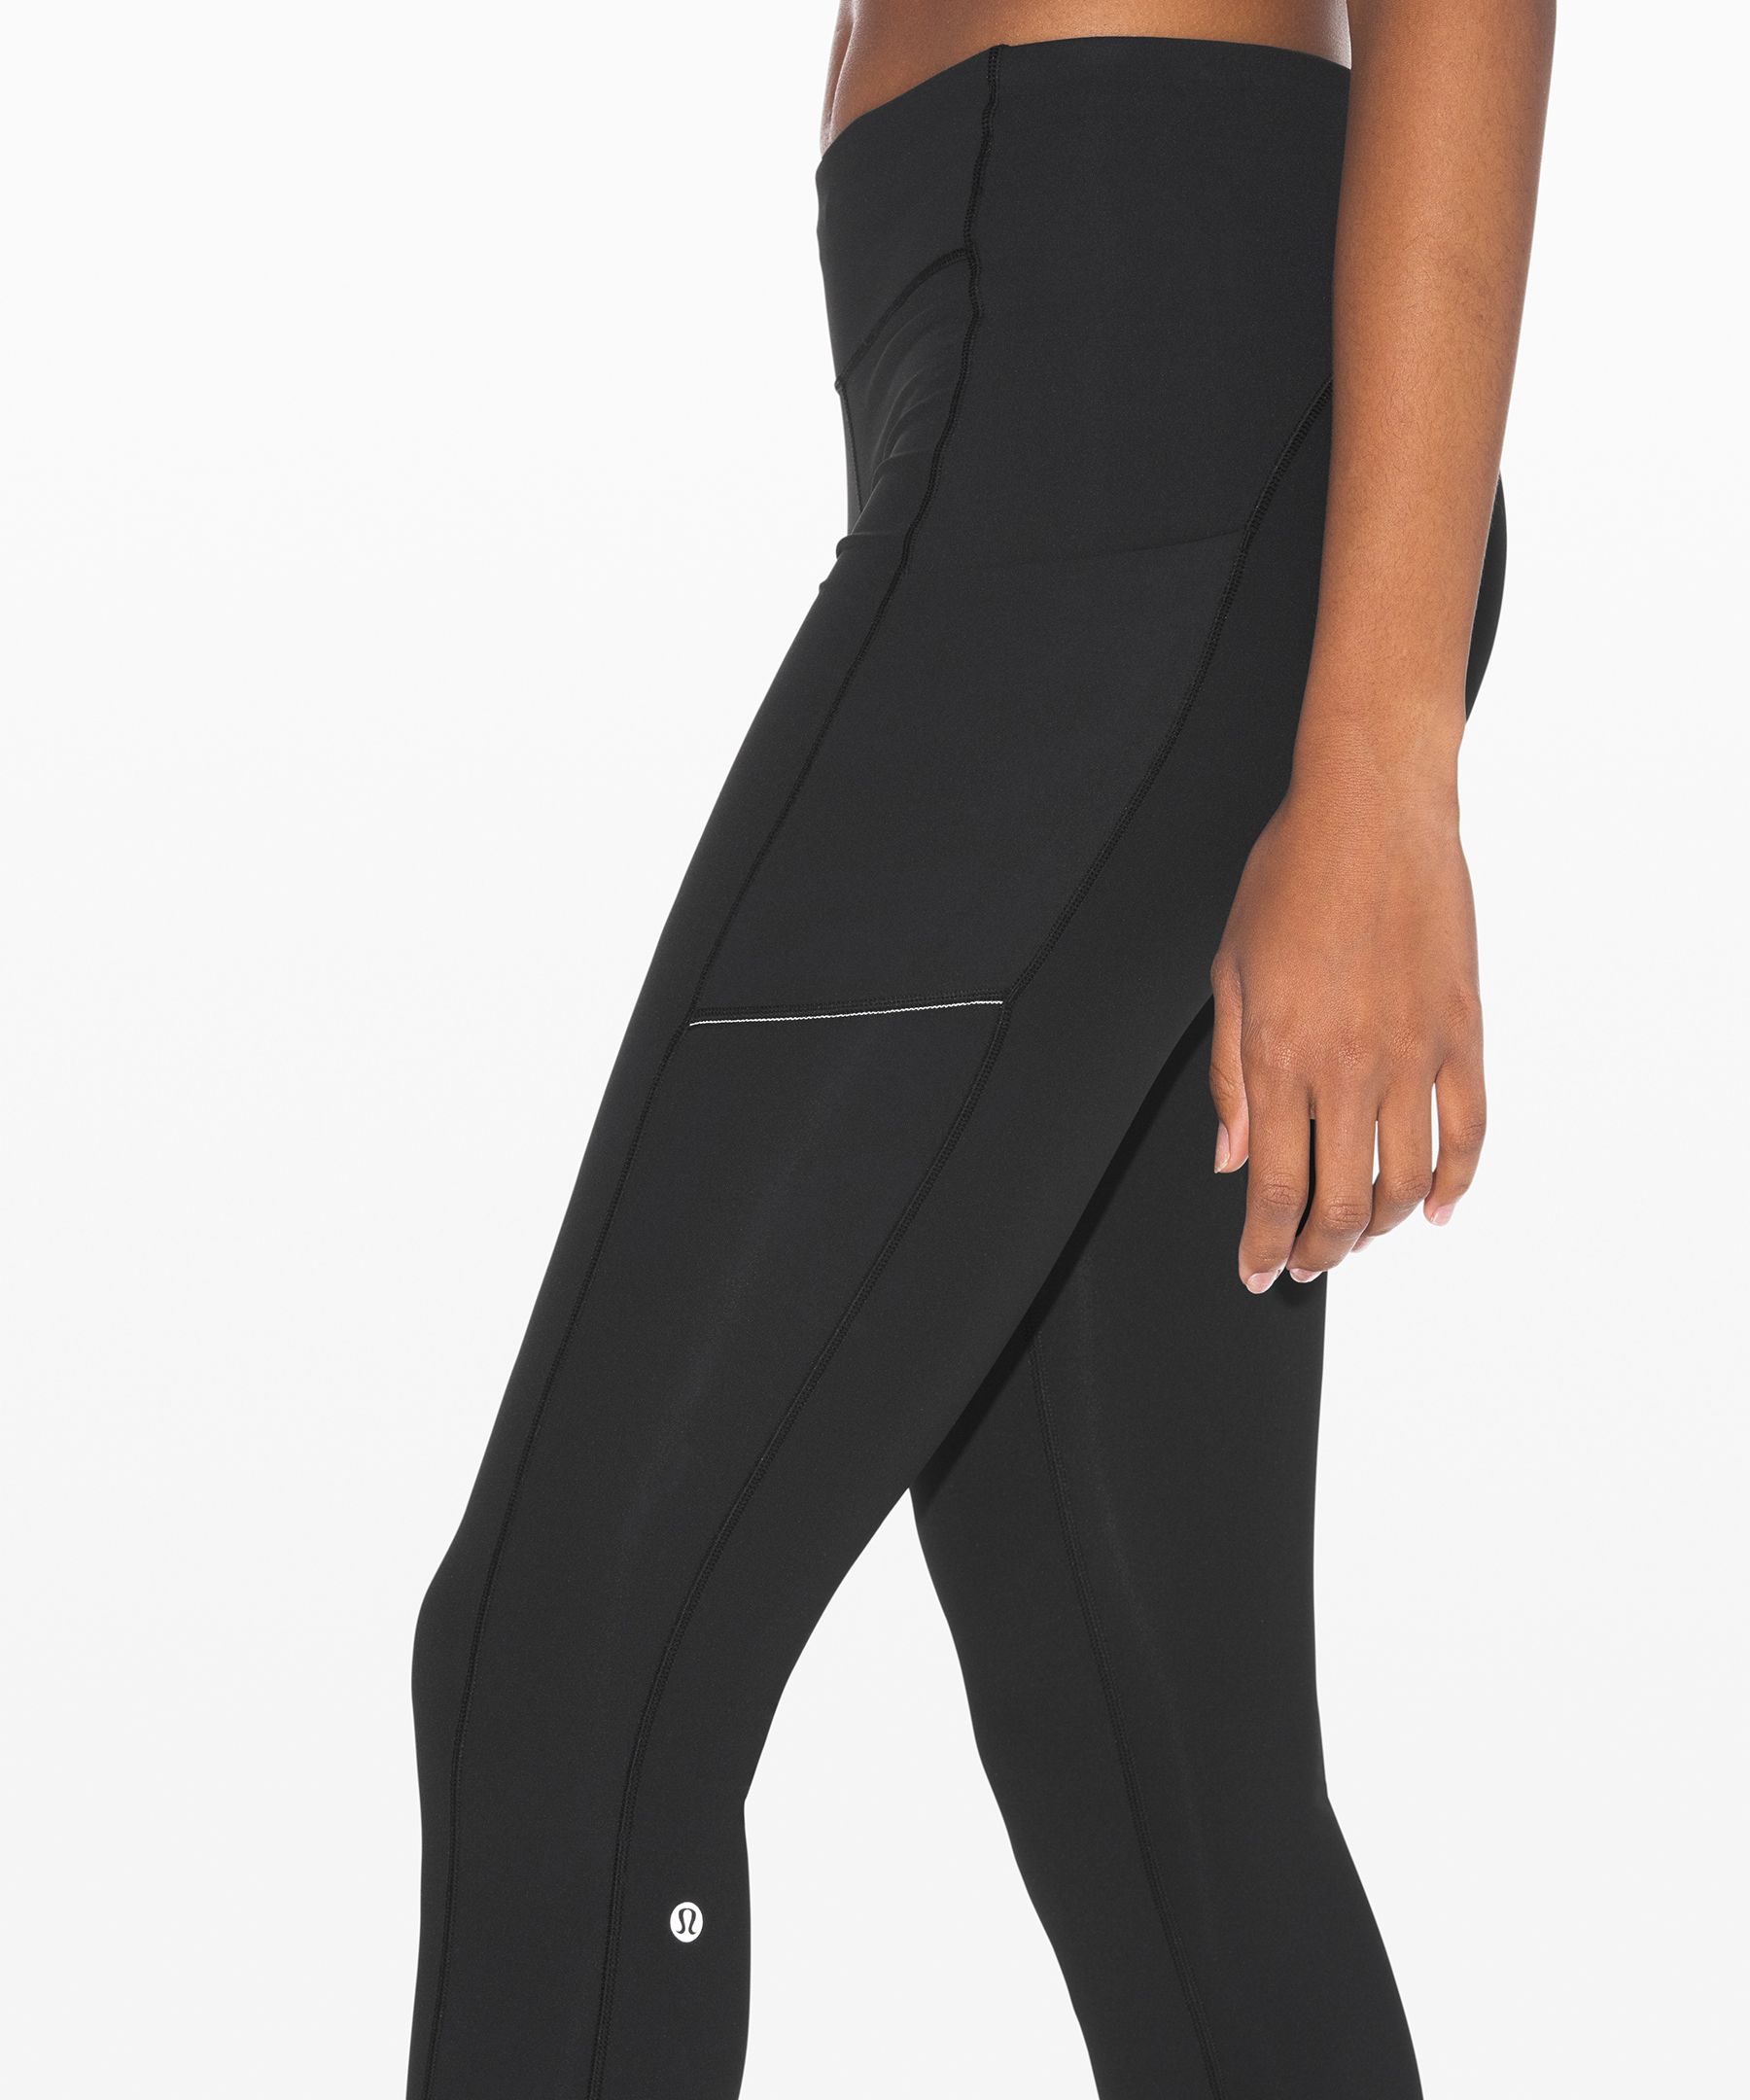 BRAND NEW WITH TAGS Lululemon Speed up Tight 28” in